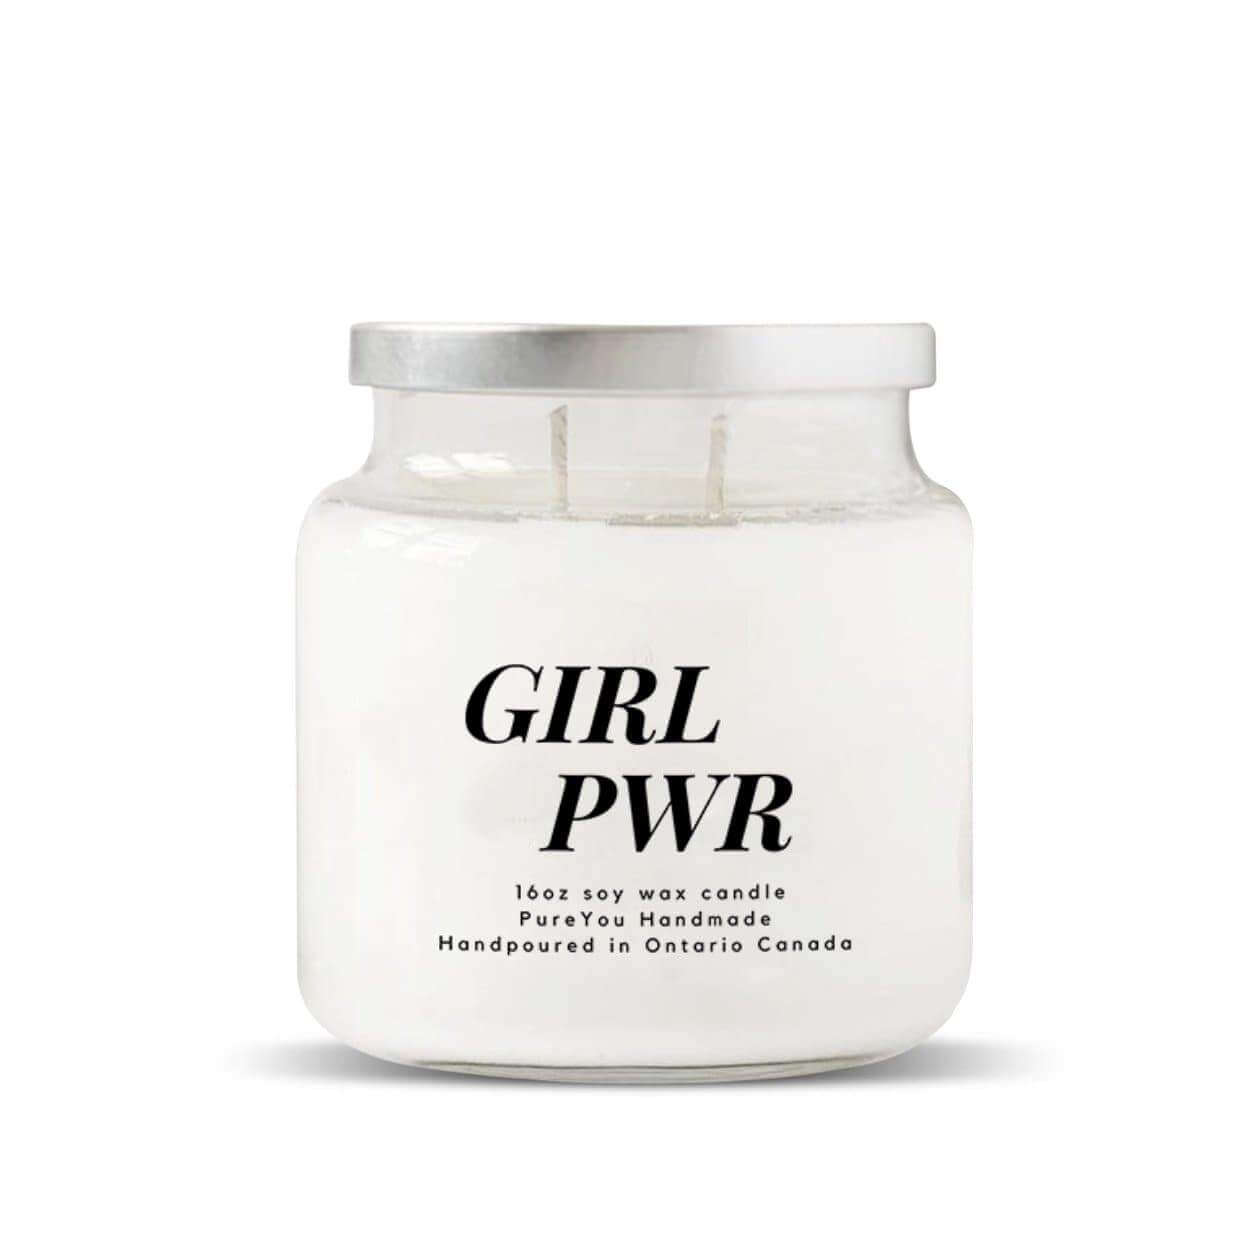 Girl Pwr Soy Wax Candle